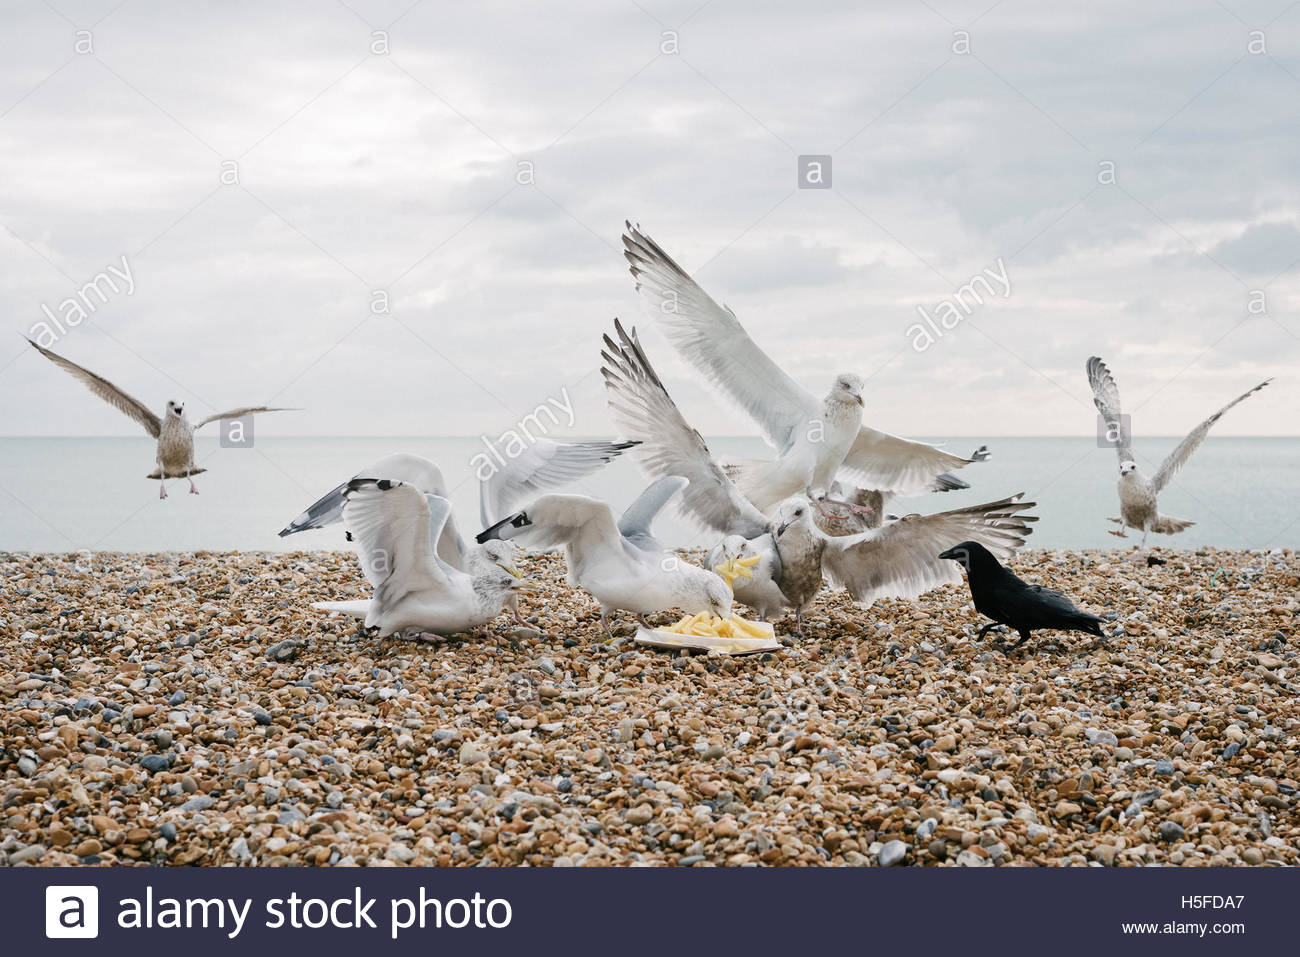 Image result for seagulls with chips